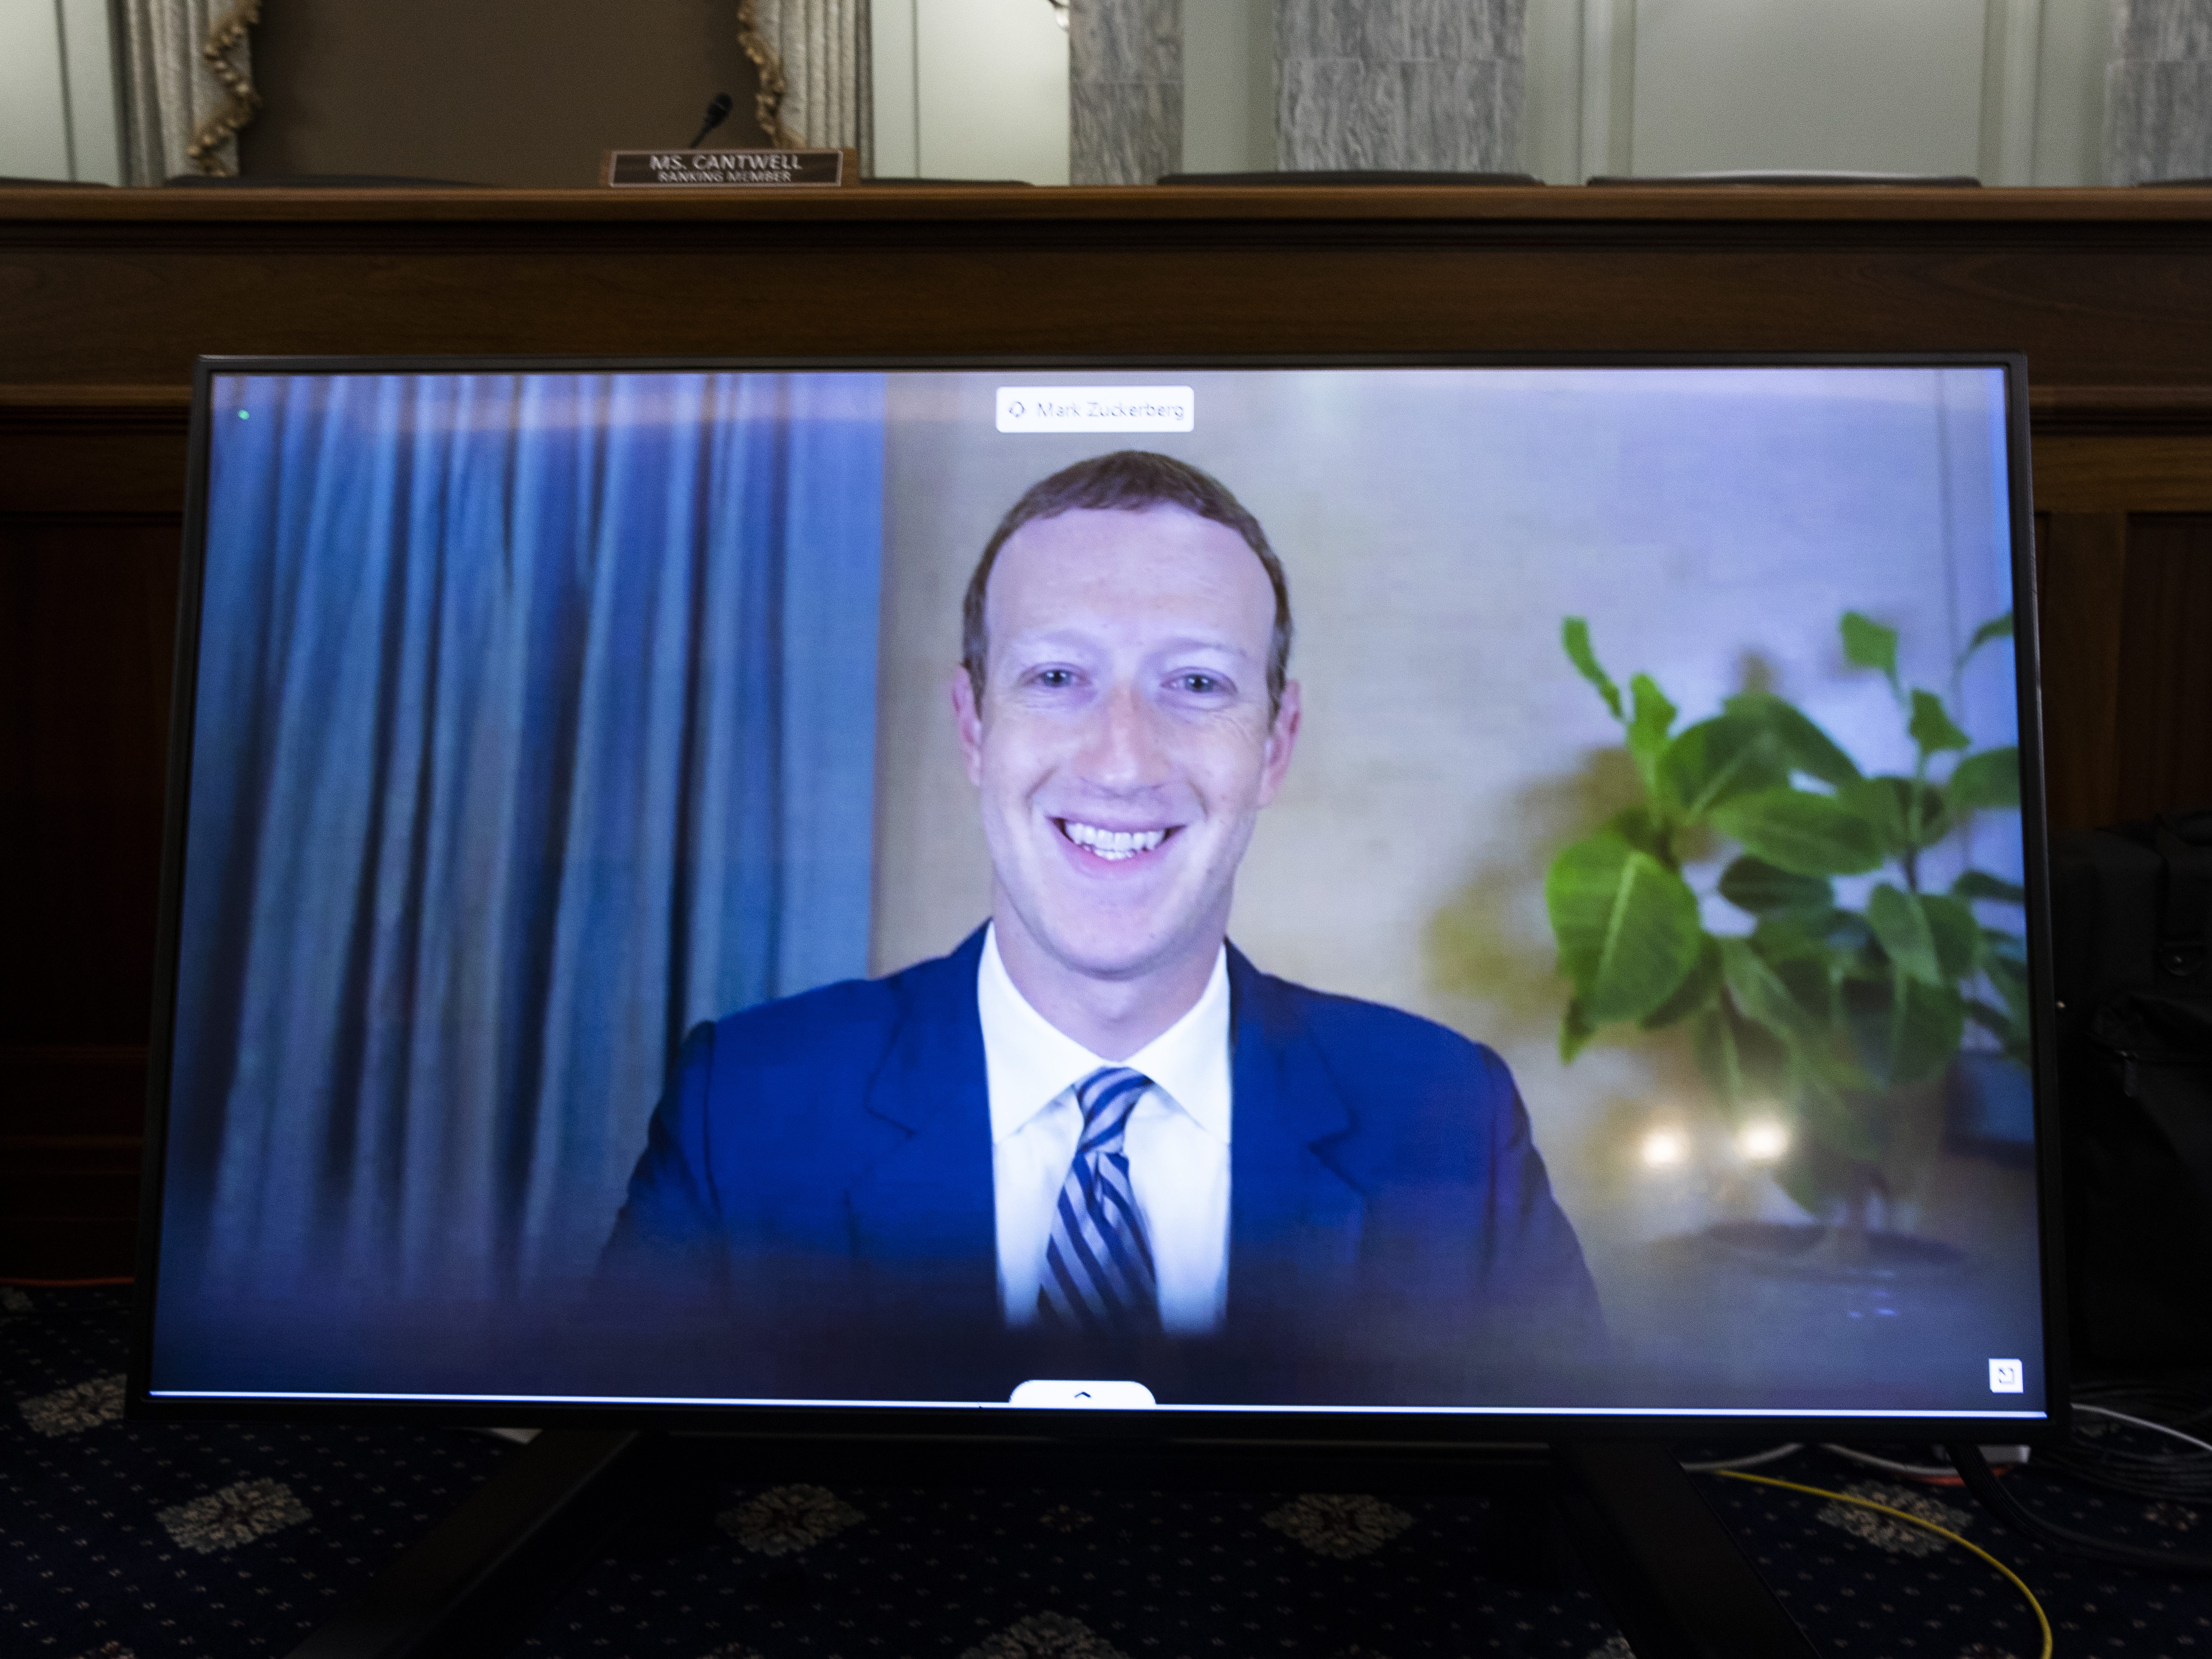 Facebook CEO Mark Zuckerberg testifies remotely during a Senate Commerce, Science, and Transportation Committee hearing on October 28, 2020. CREDIT: Pool/Getty Images